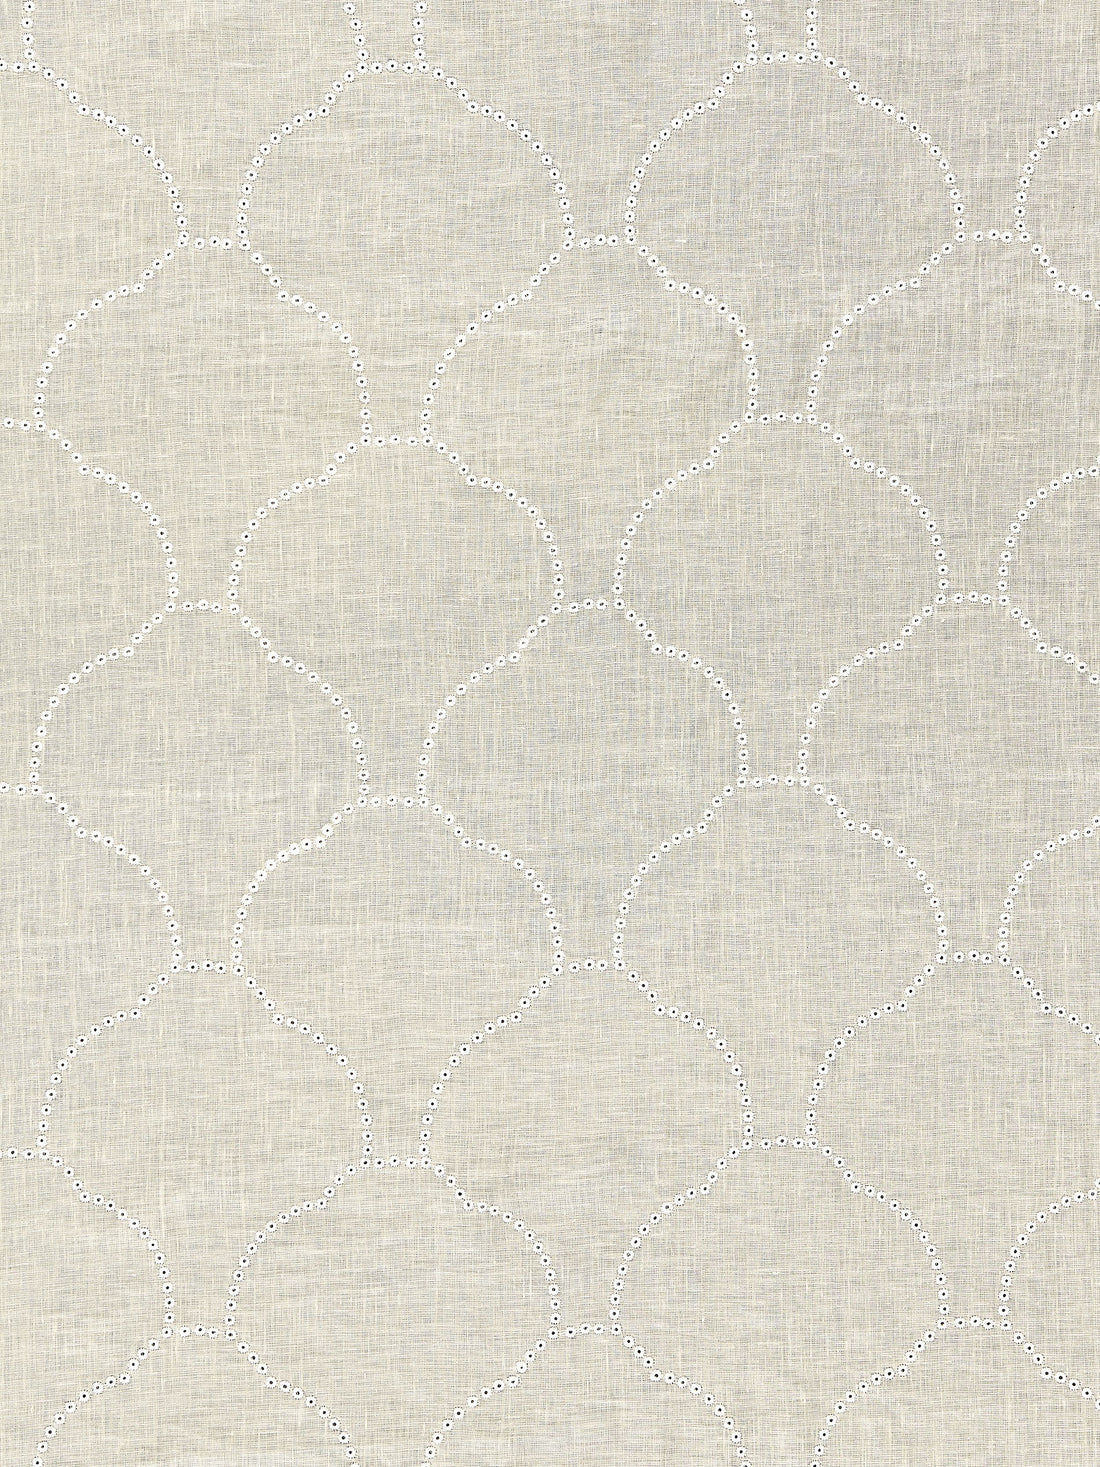 Coquille Sheer fabric in flax color - pattern number SC 000227038 - by Scalamandre in the Scalamandre Fabrics Book 1 collection